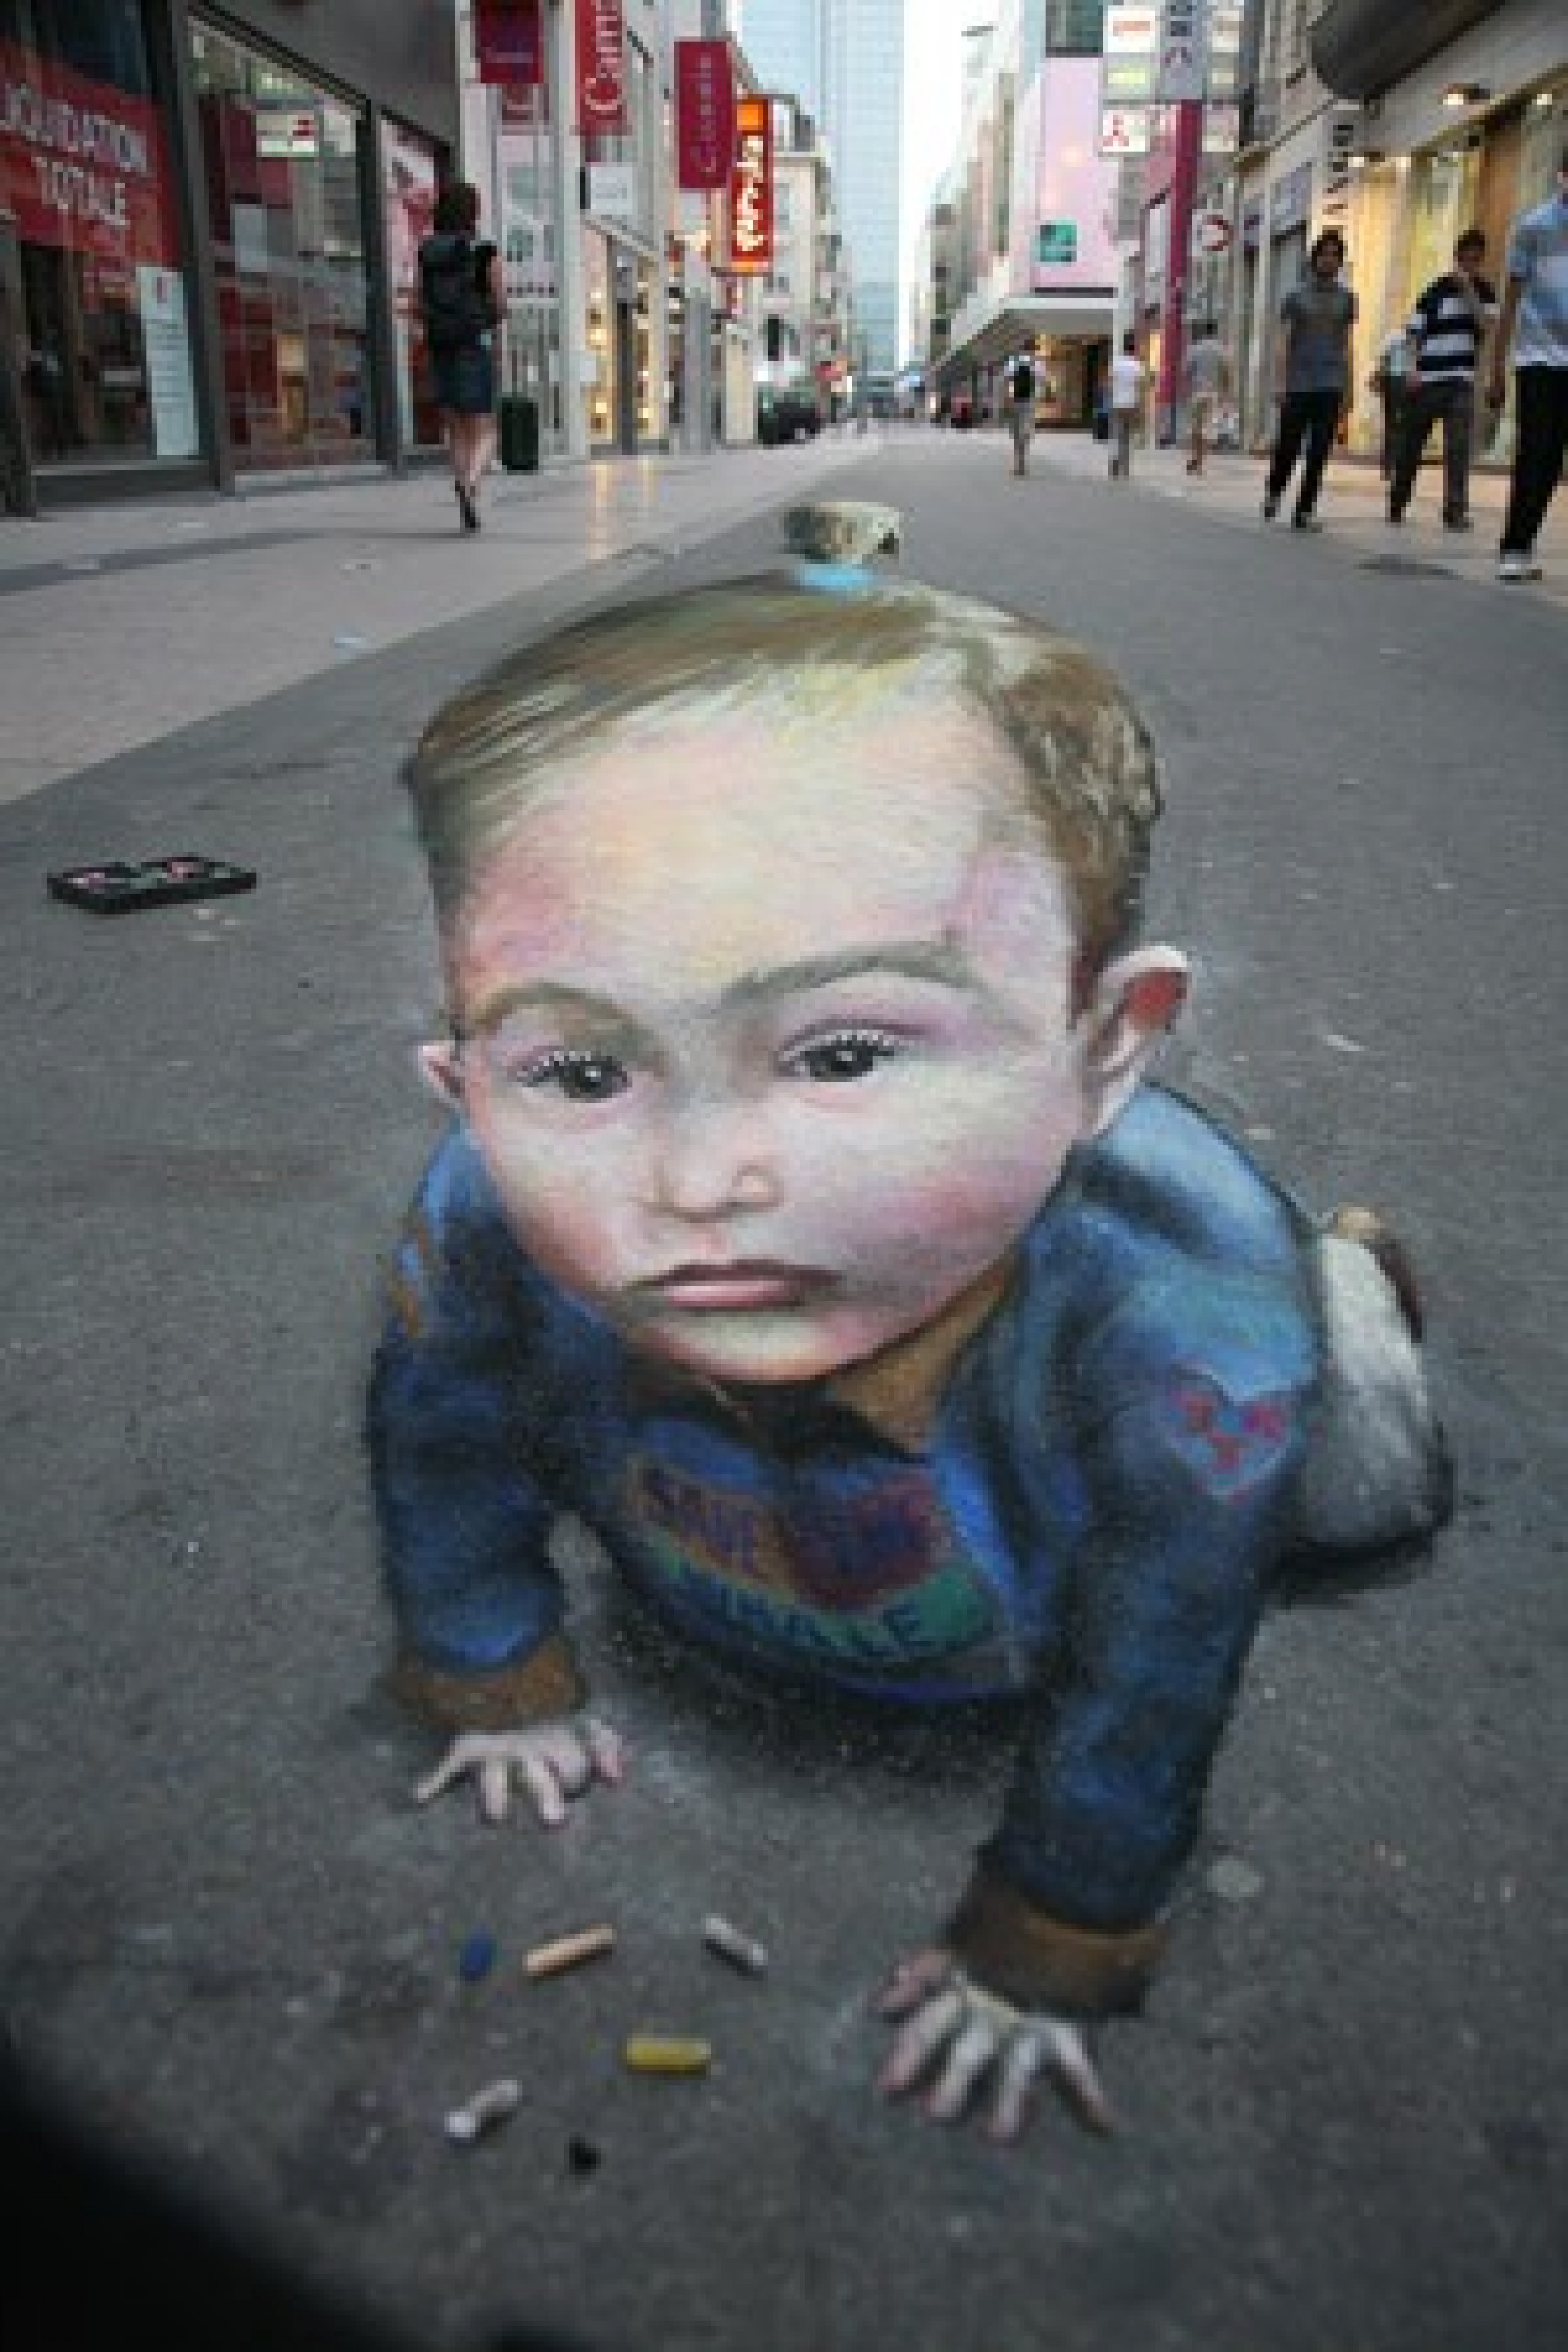 Astounding 3D Images by Beever on the UK streets.